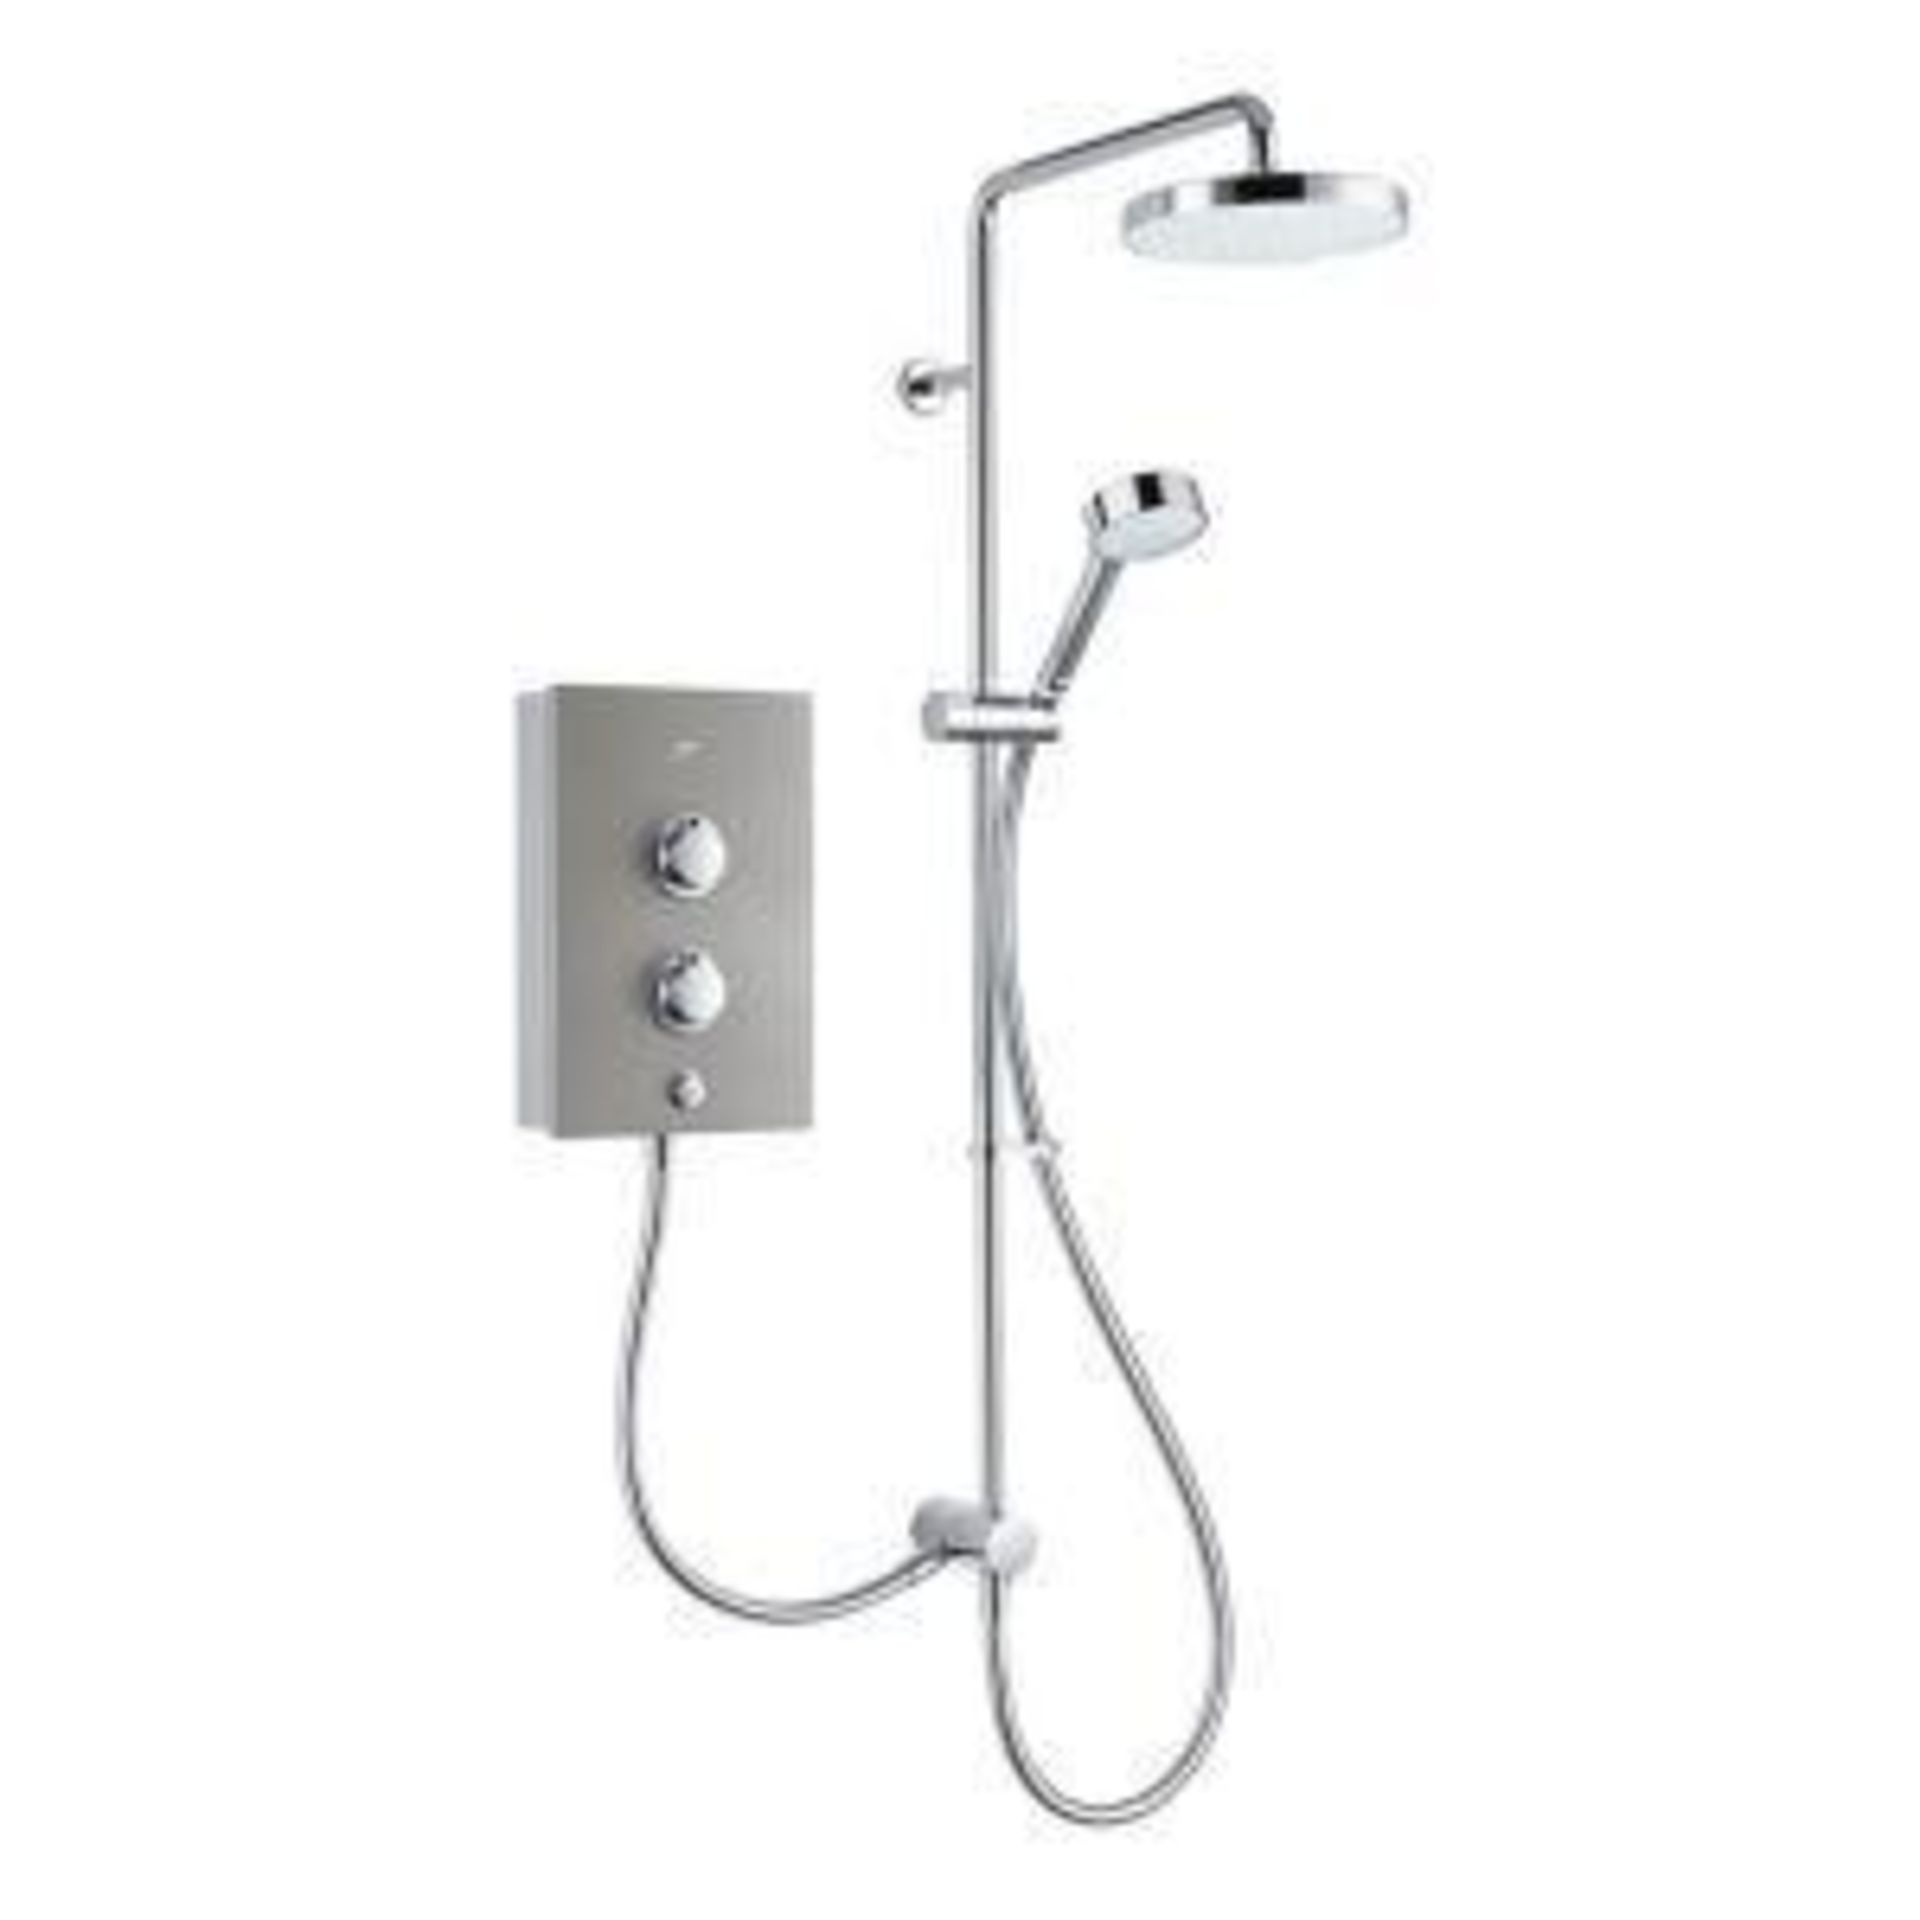 Mira Decor 10.8Kw Silver Dual Outlet Shower 1.1894.003 - SR48. Make your shower the perfect focal